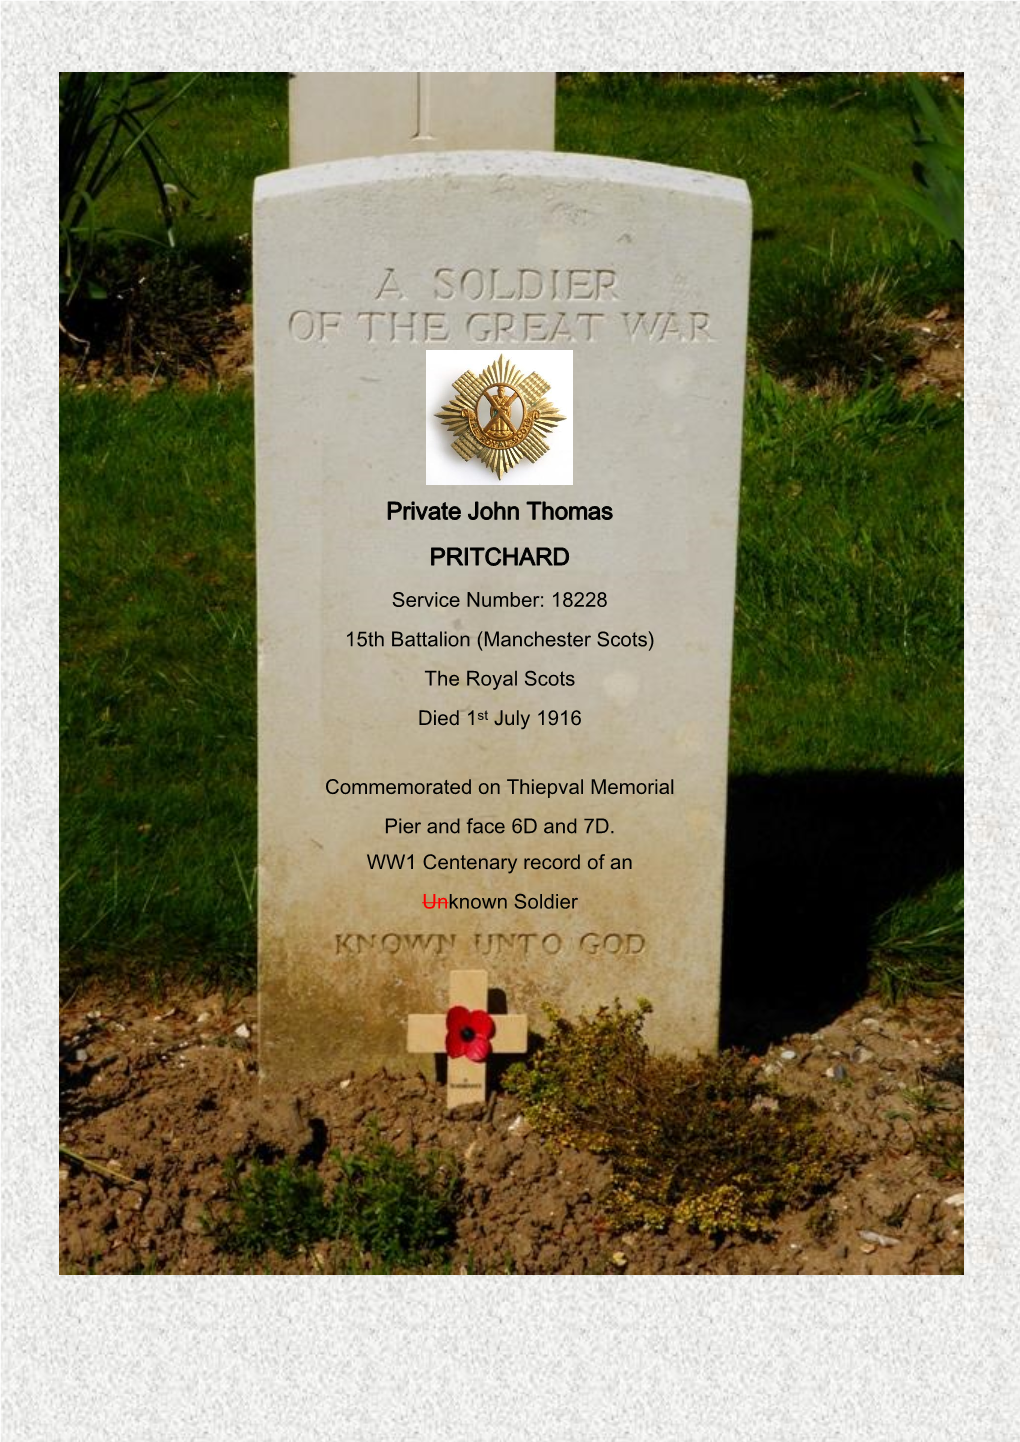 Private John Thomas PRITCHARD Service Number: 18228 15Th Battalion (Manchester Scots) the Royal Scots Died 1St July 1916